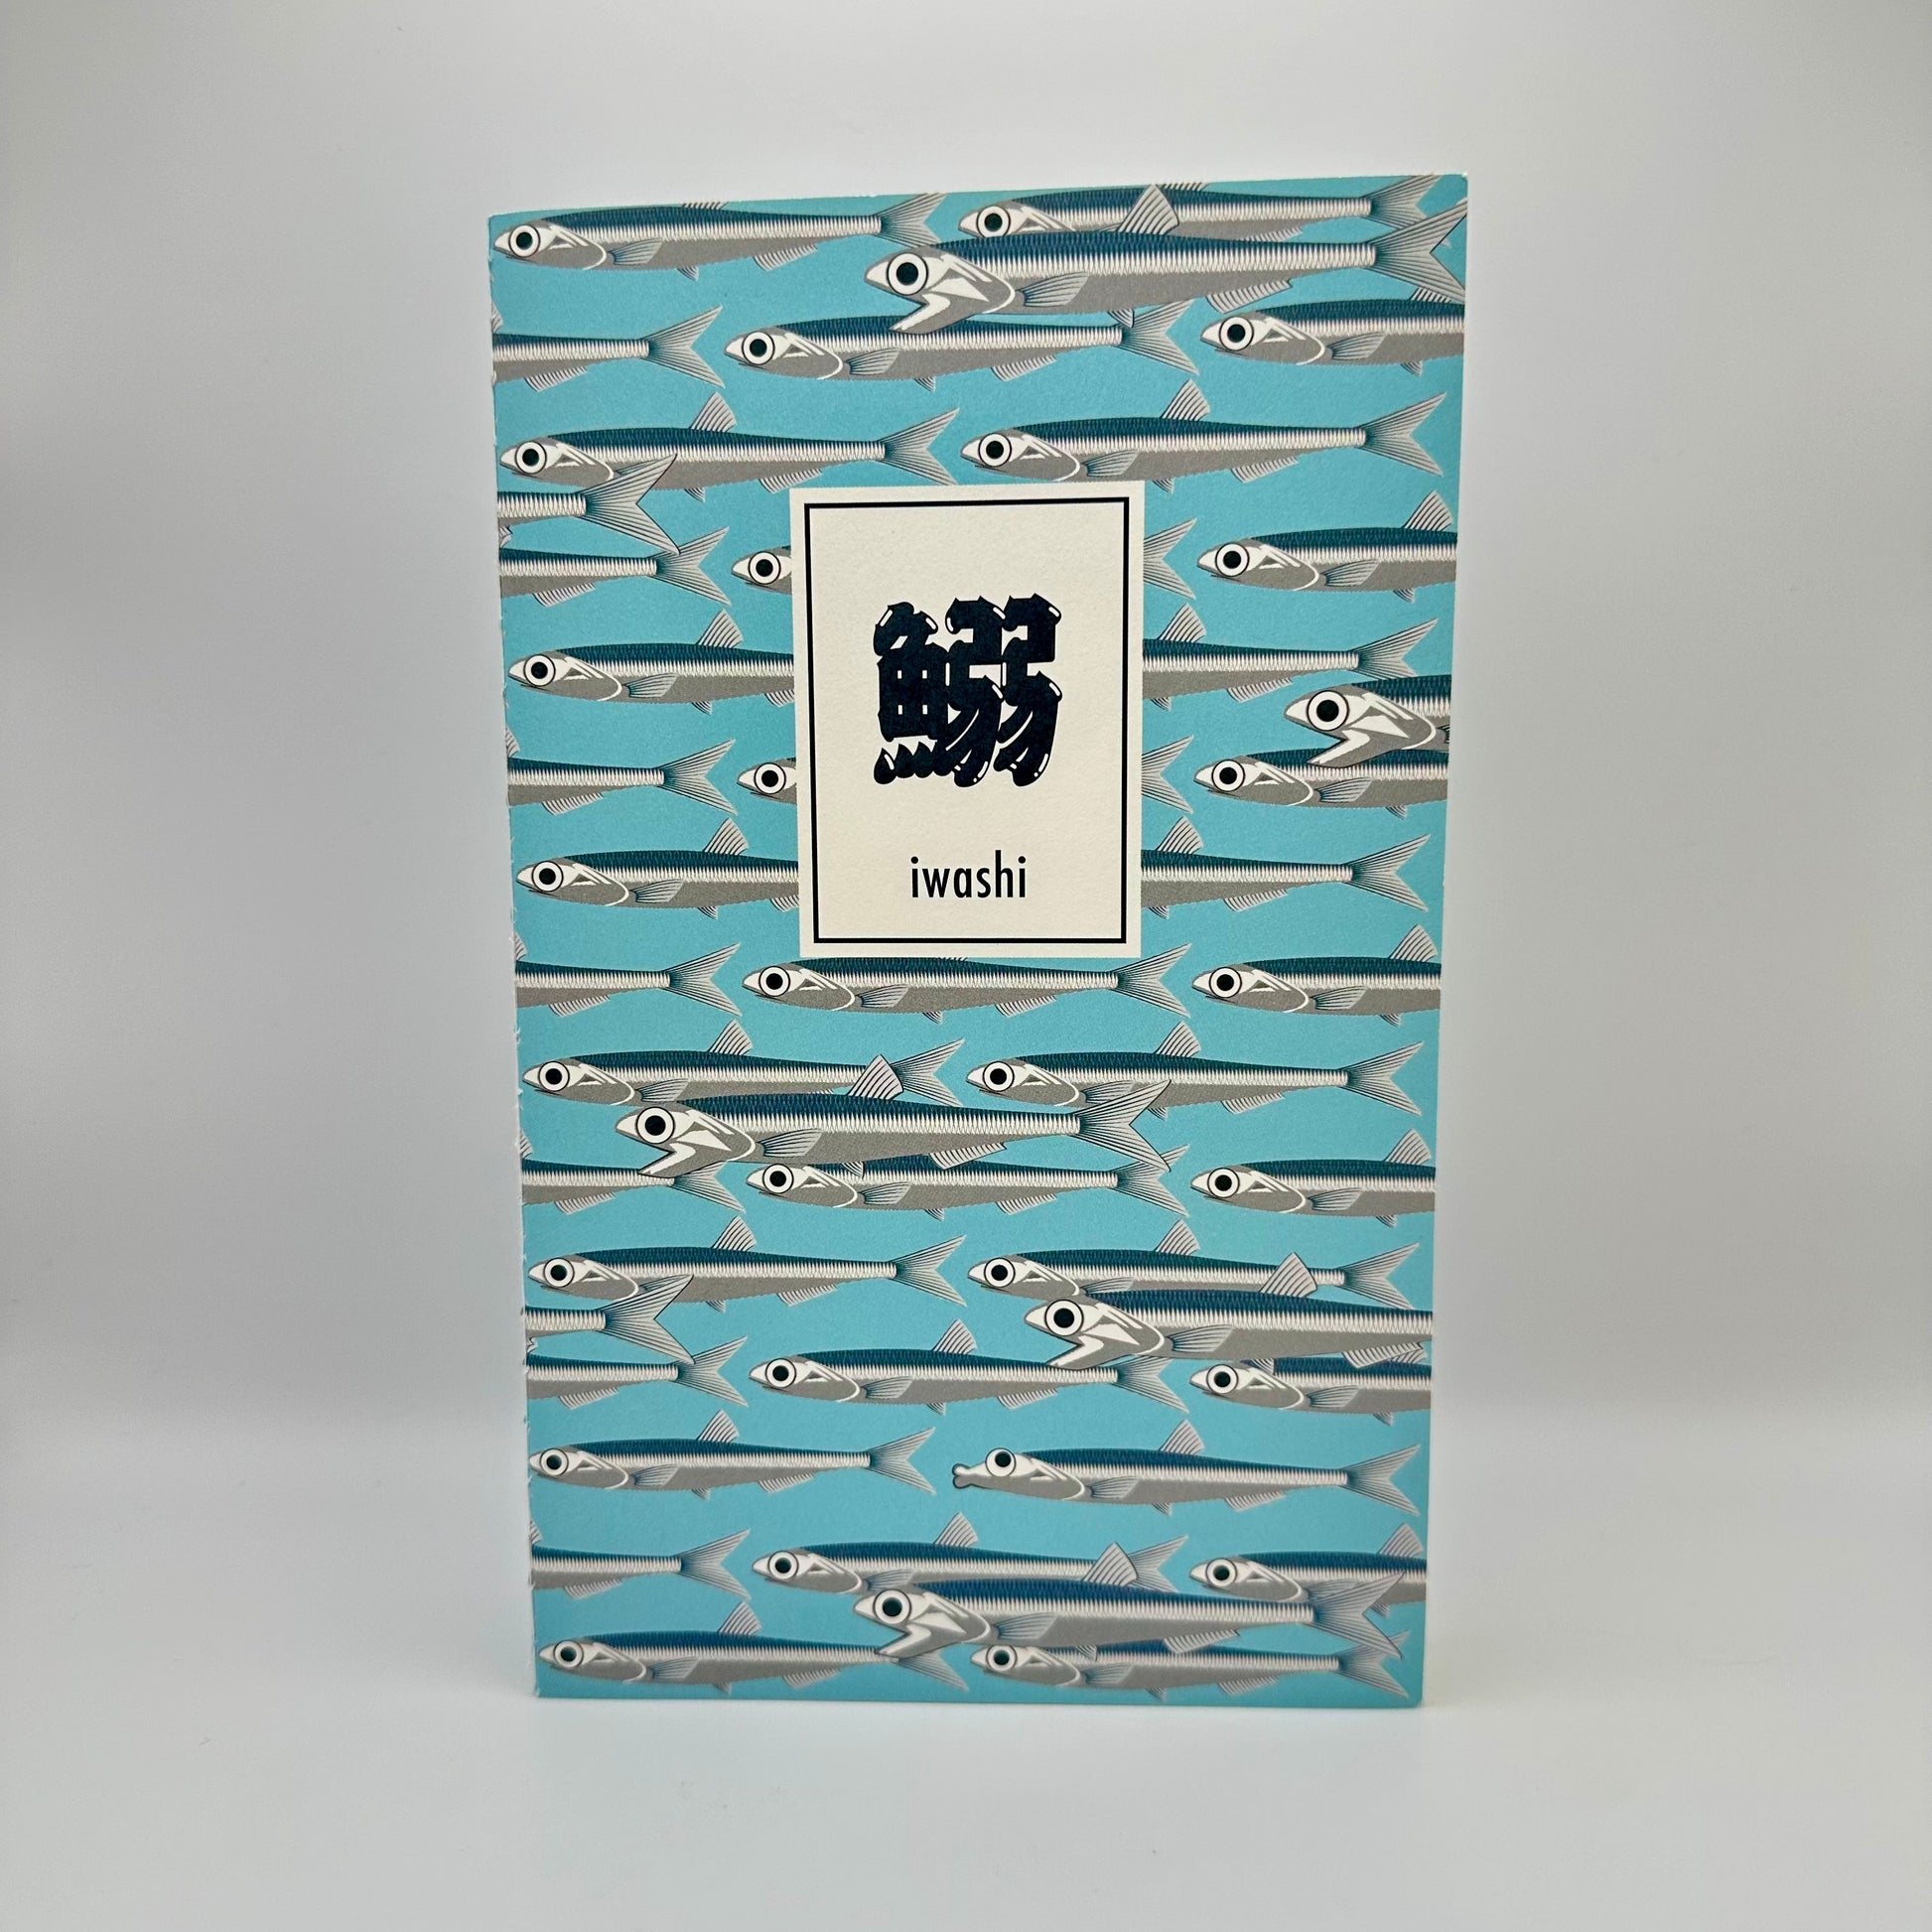 Notebook with blue background with silver sardines swimming. Text box in Japanese that reads "Iwashi"